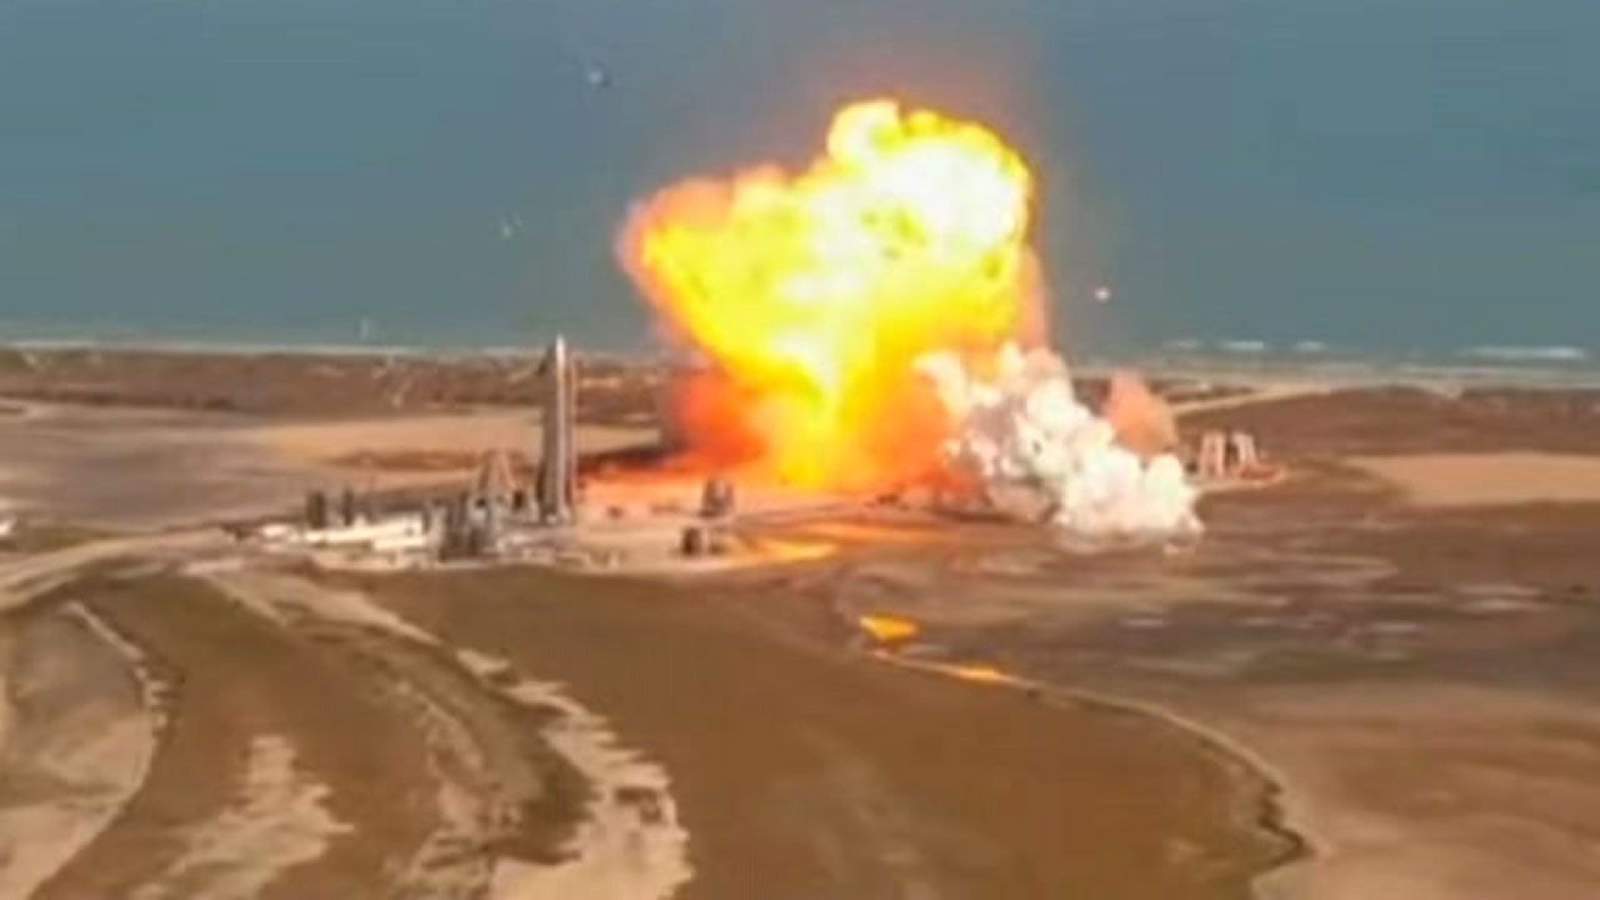 VIDEO: SpaceX Starship SN 9 explodes while landing during successful test flight in Boca Chica